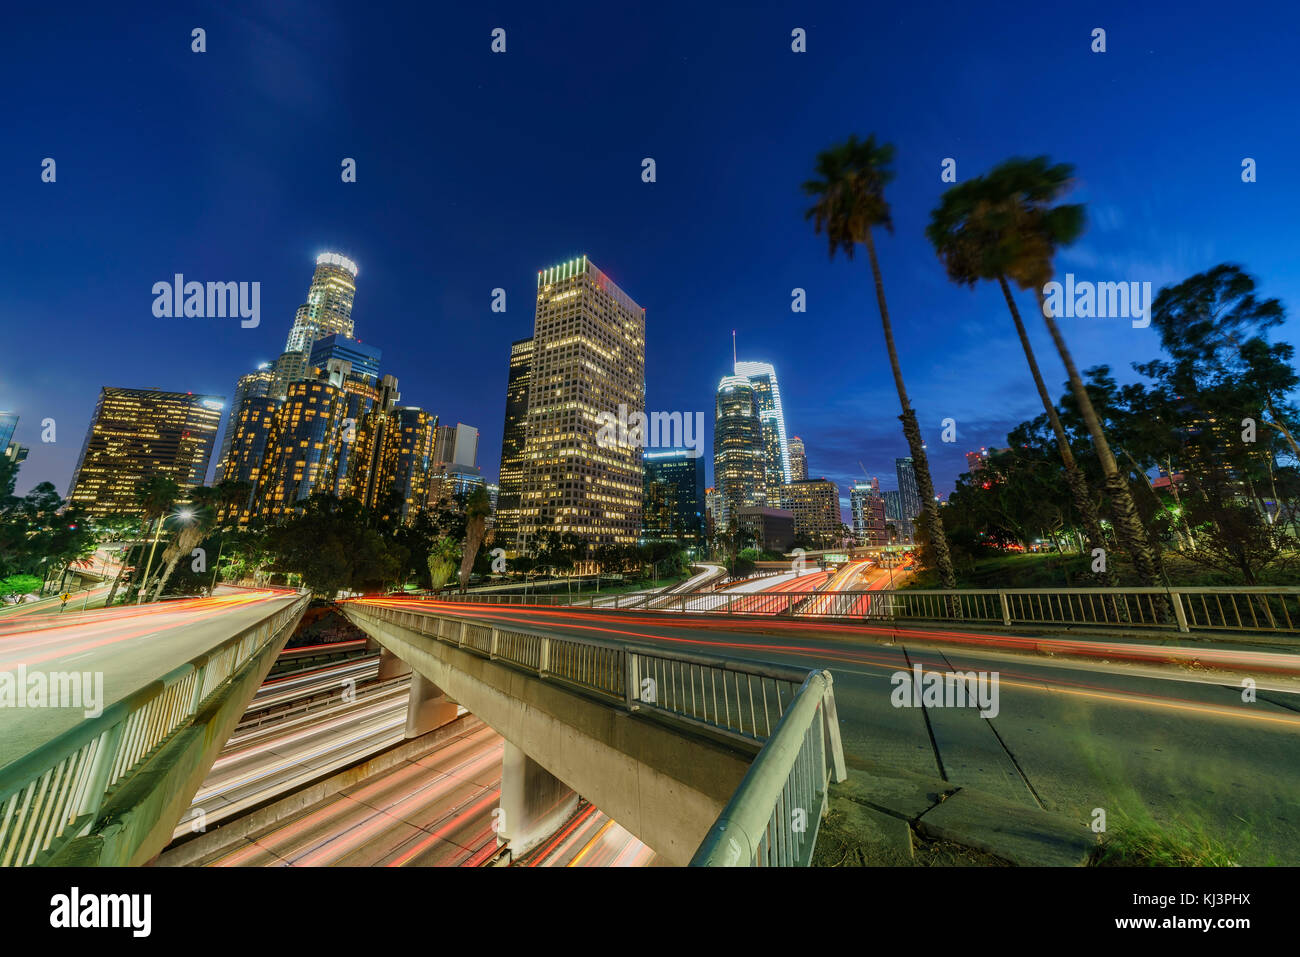 Classical nightscape skyline of Los Angeles downtown, California, United States Stock Photo